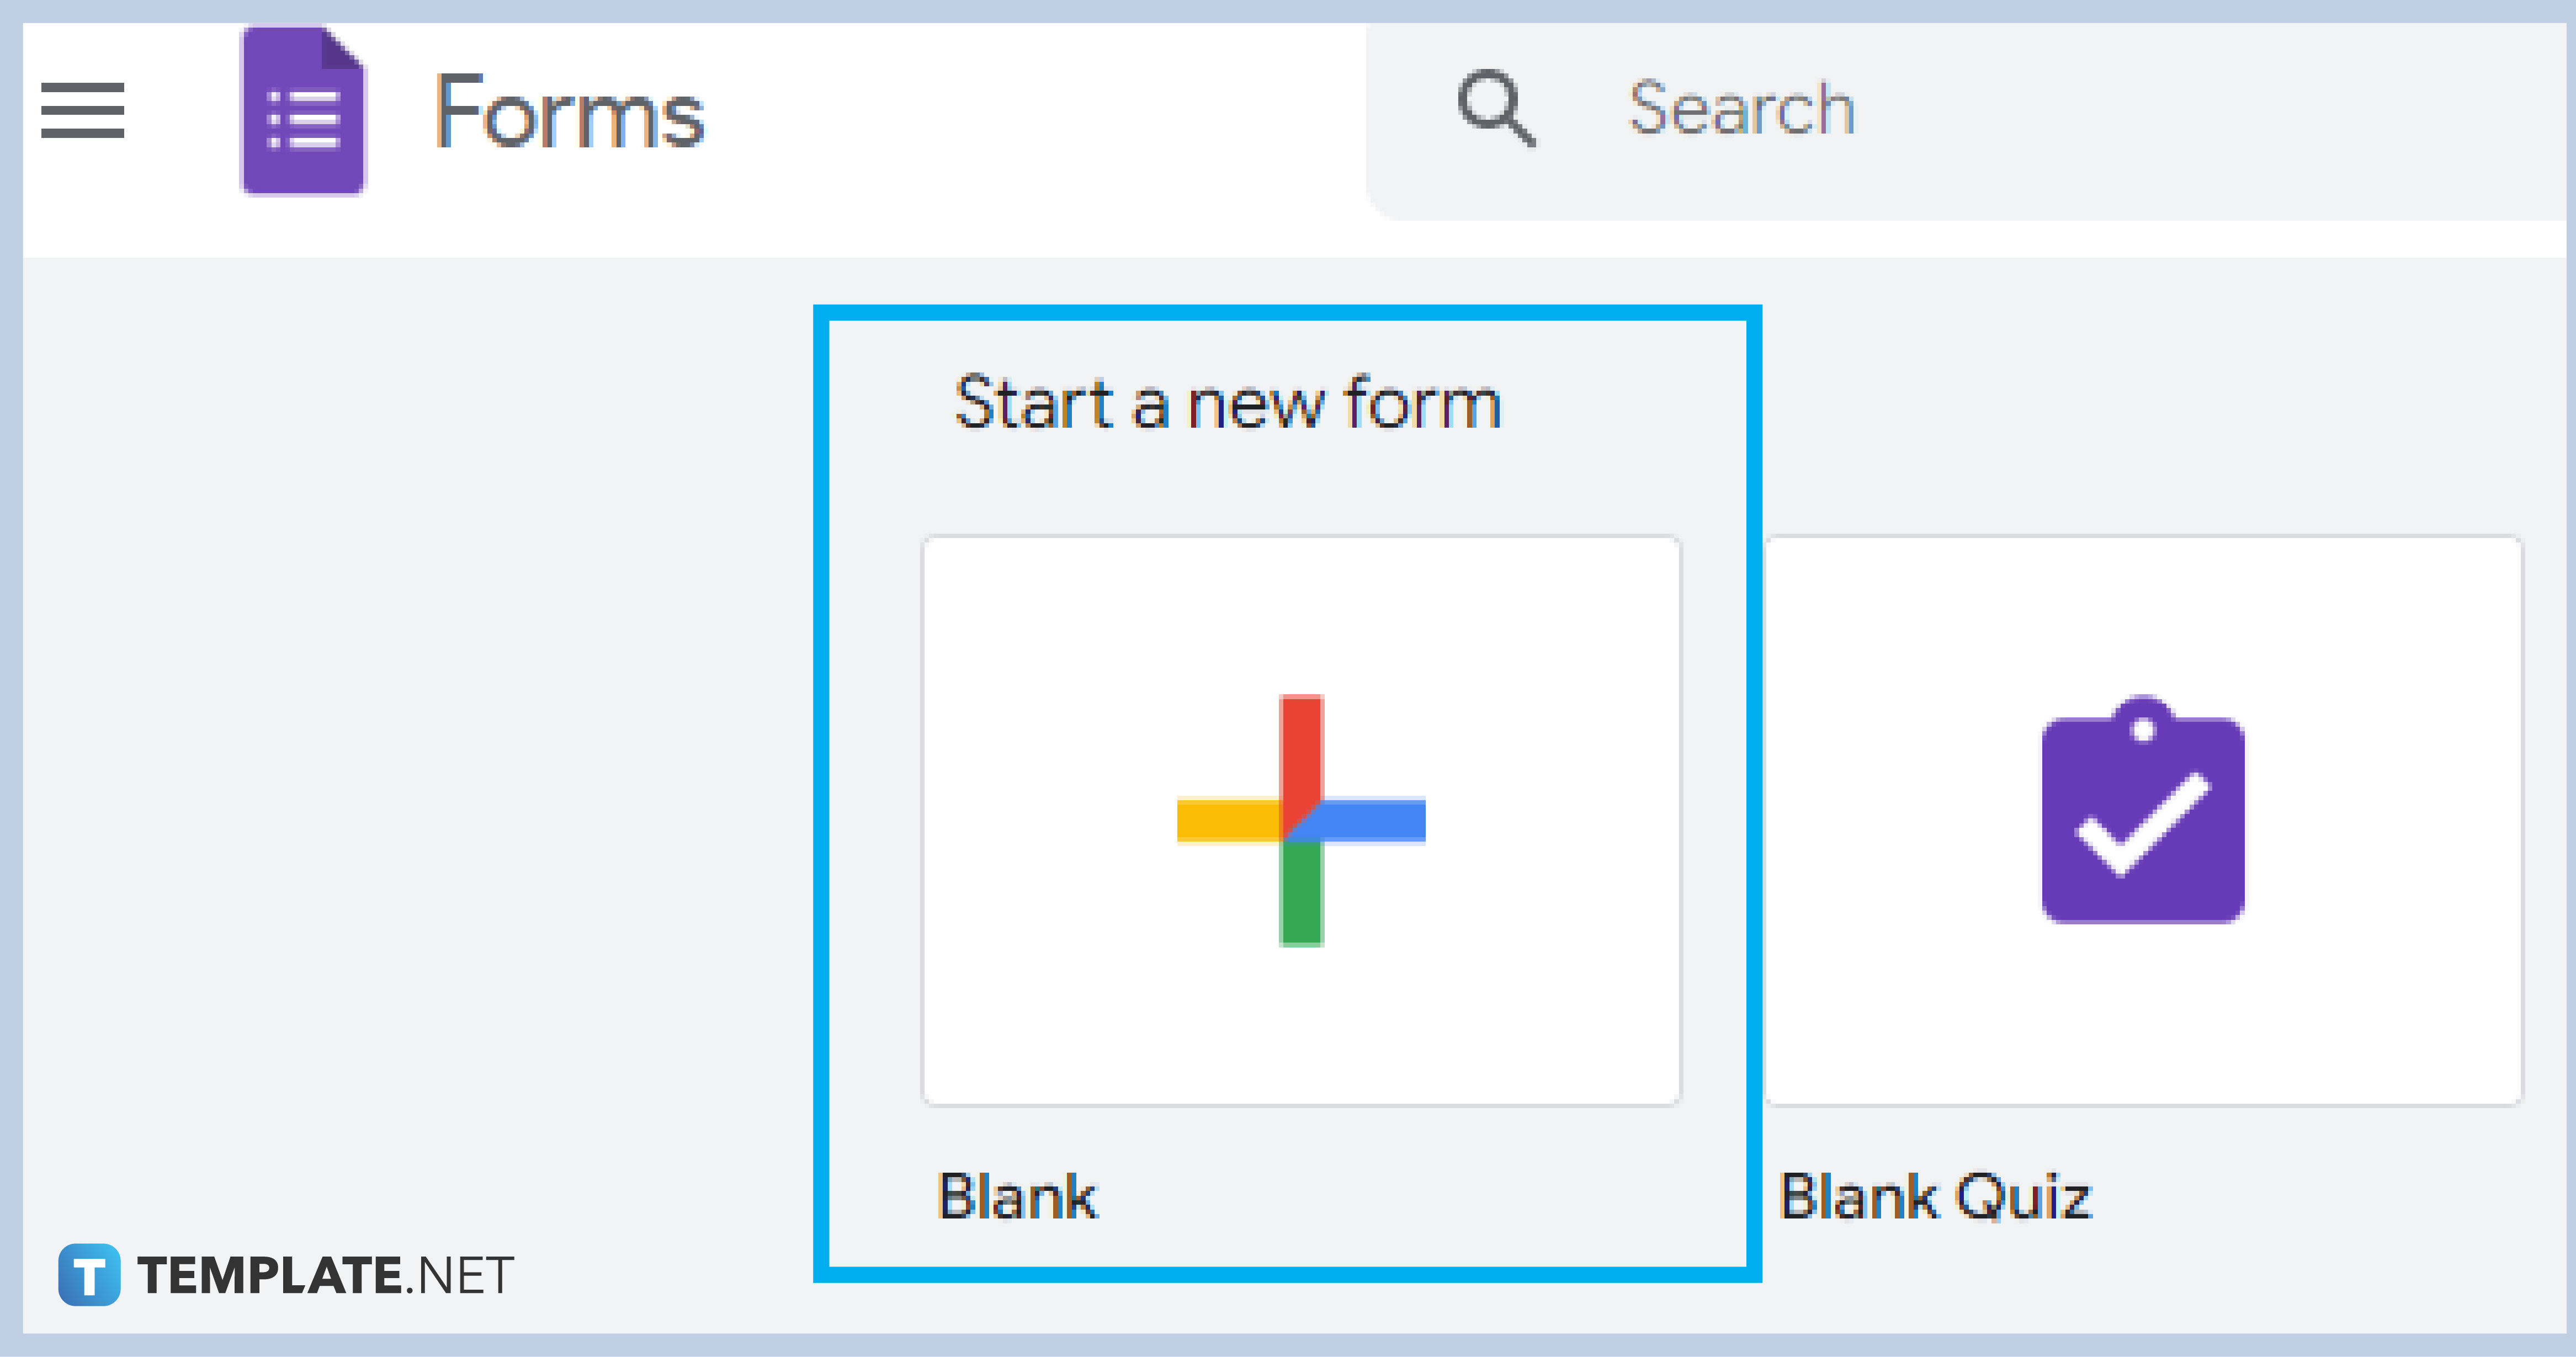 step 4 click blank to start a new form 0